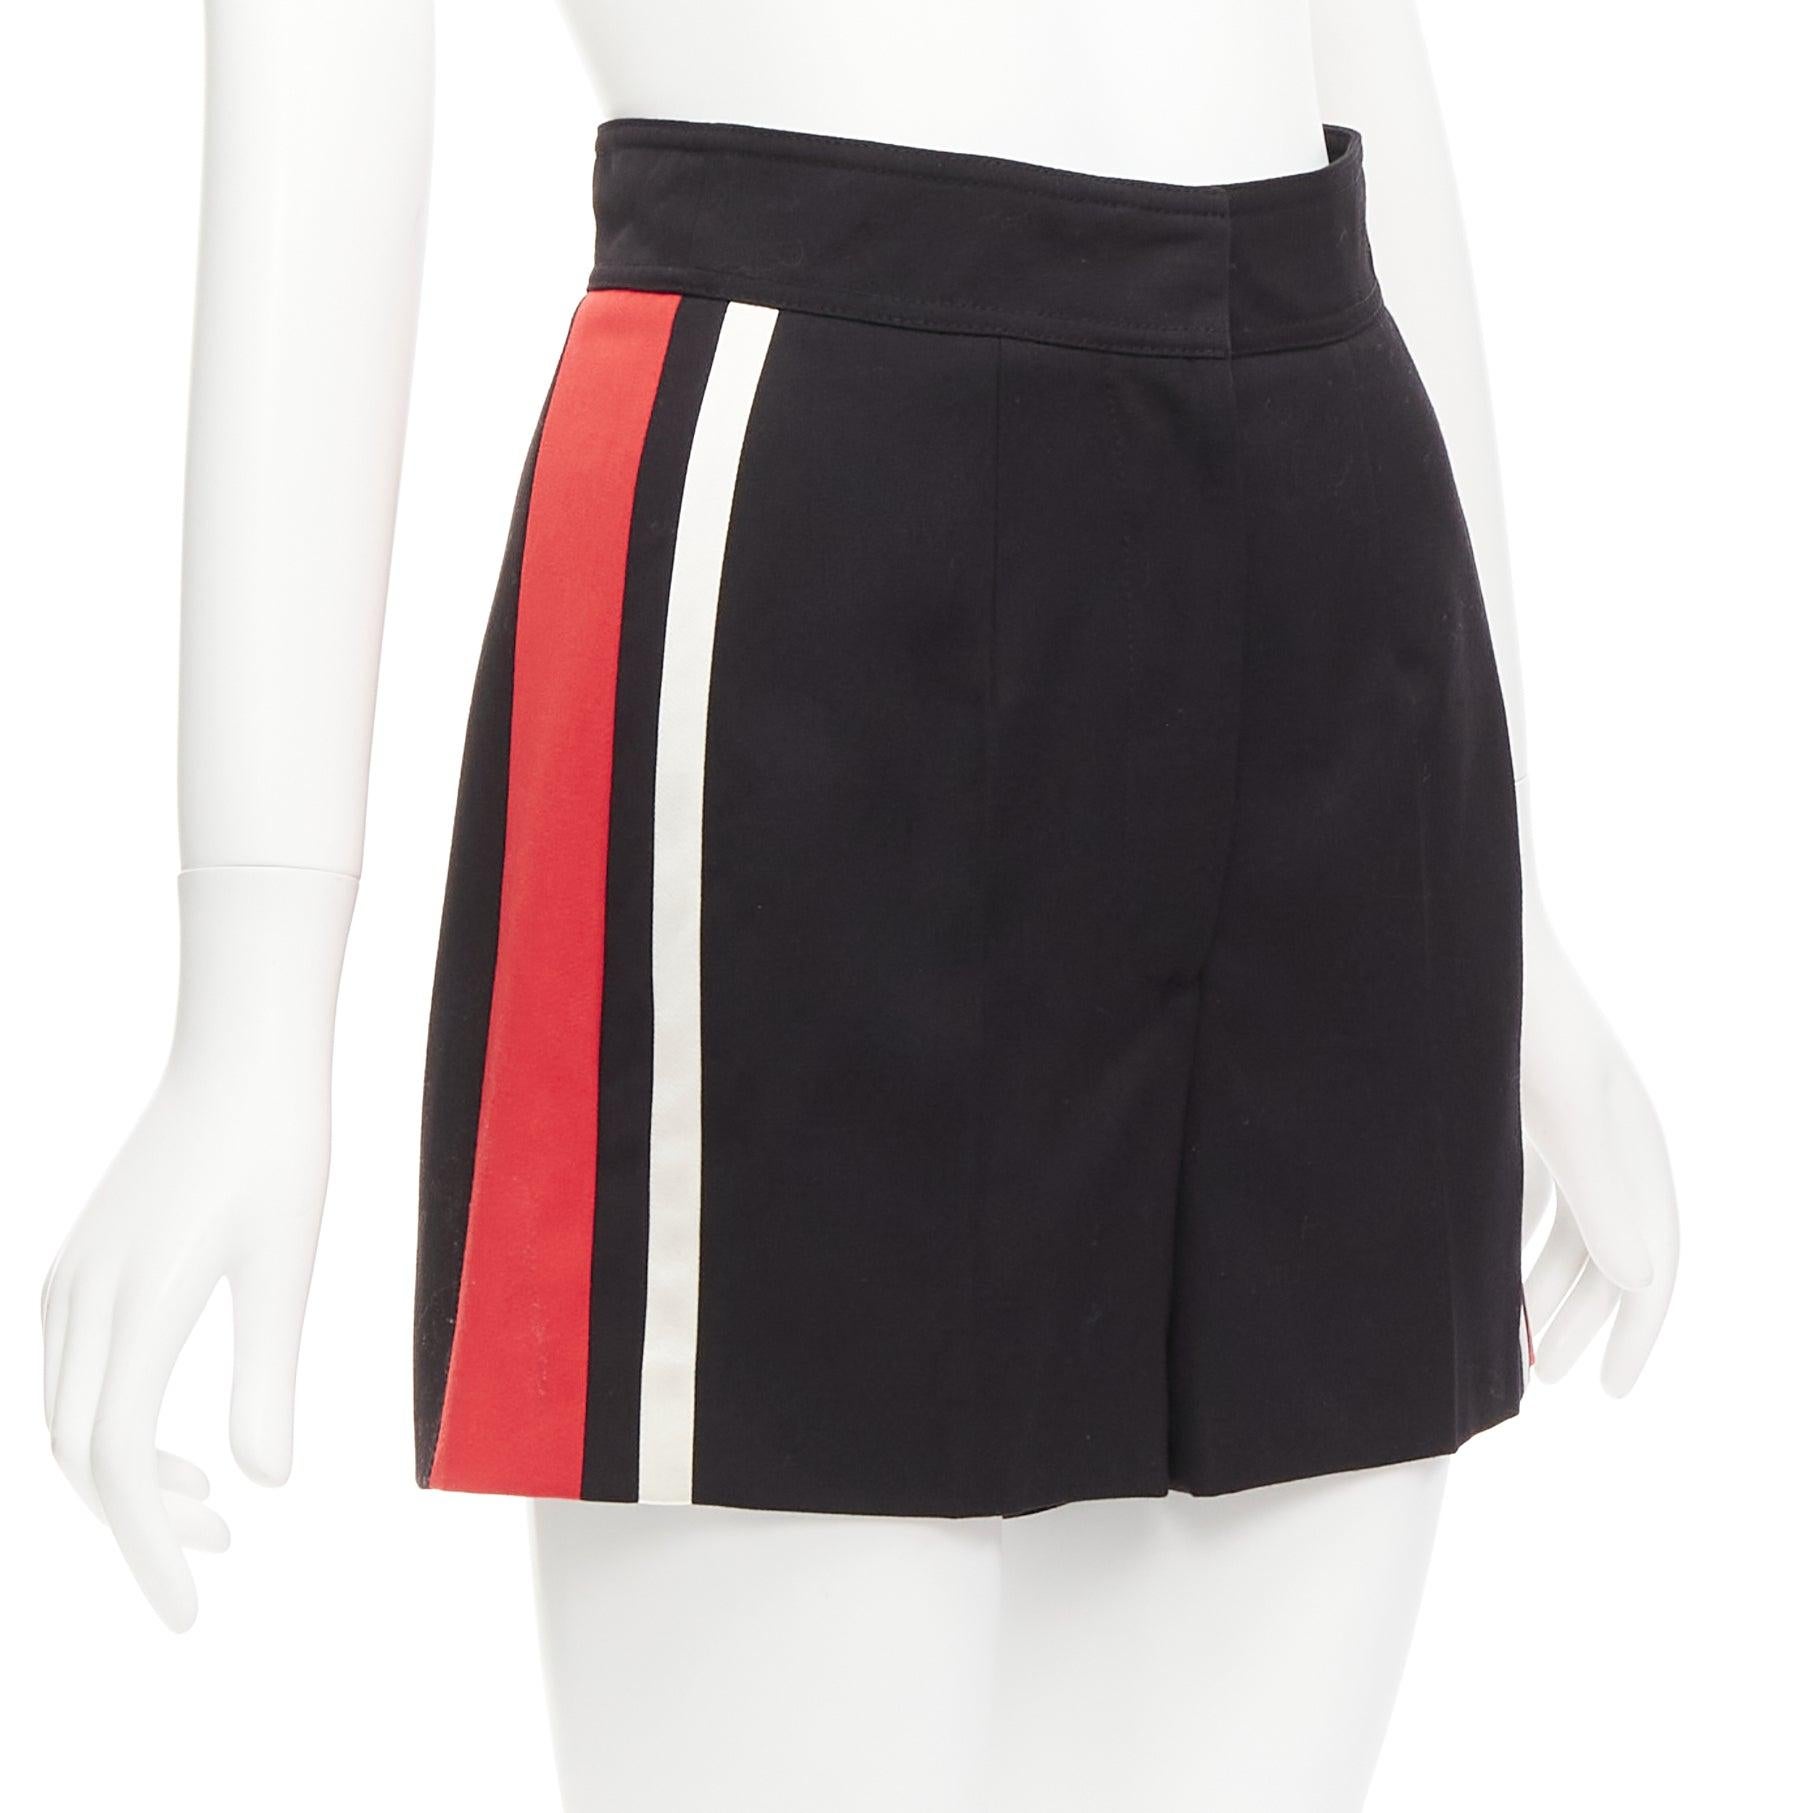 ALEXANDER MCQUEEN 2018 red white stripe black virgin wool wide shorts IT38 XS
Reference: AAWC/A00963
Brand: Alexander McQueen
Designer: Sarah Burton
Material: Virgin Wool
Color: Black, Red
Pattern: Striped
Closure: Zip Fly
Lining: Black Fabric
Extra